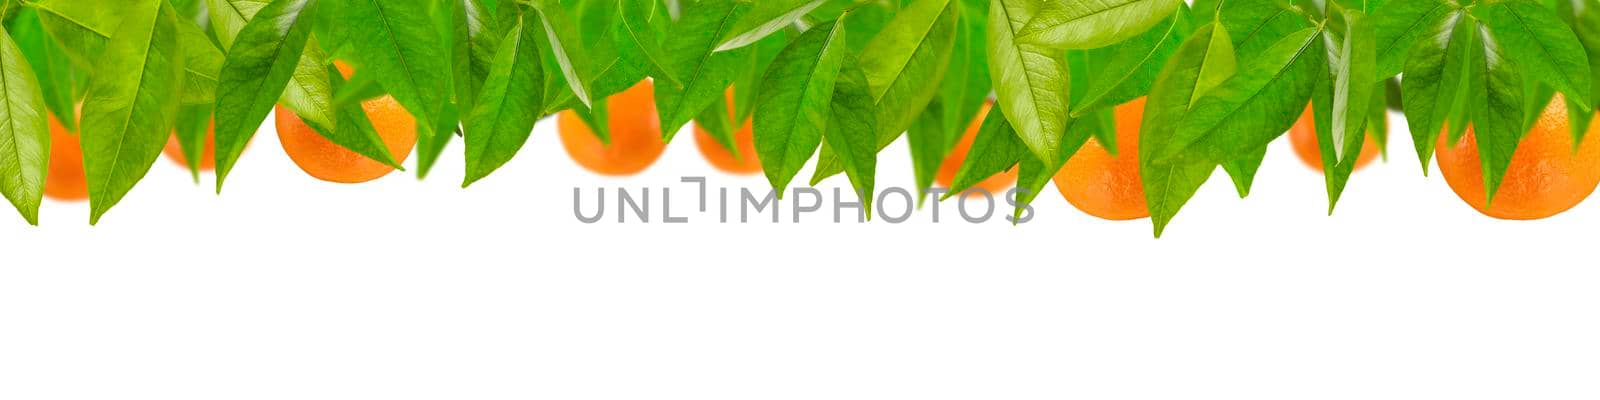 Tangerines in leaves are arranged in a row on a white background. Mandarin tree leaves with tangerines for label printing or design.